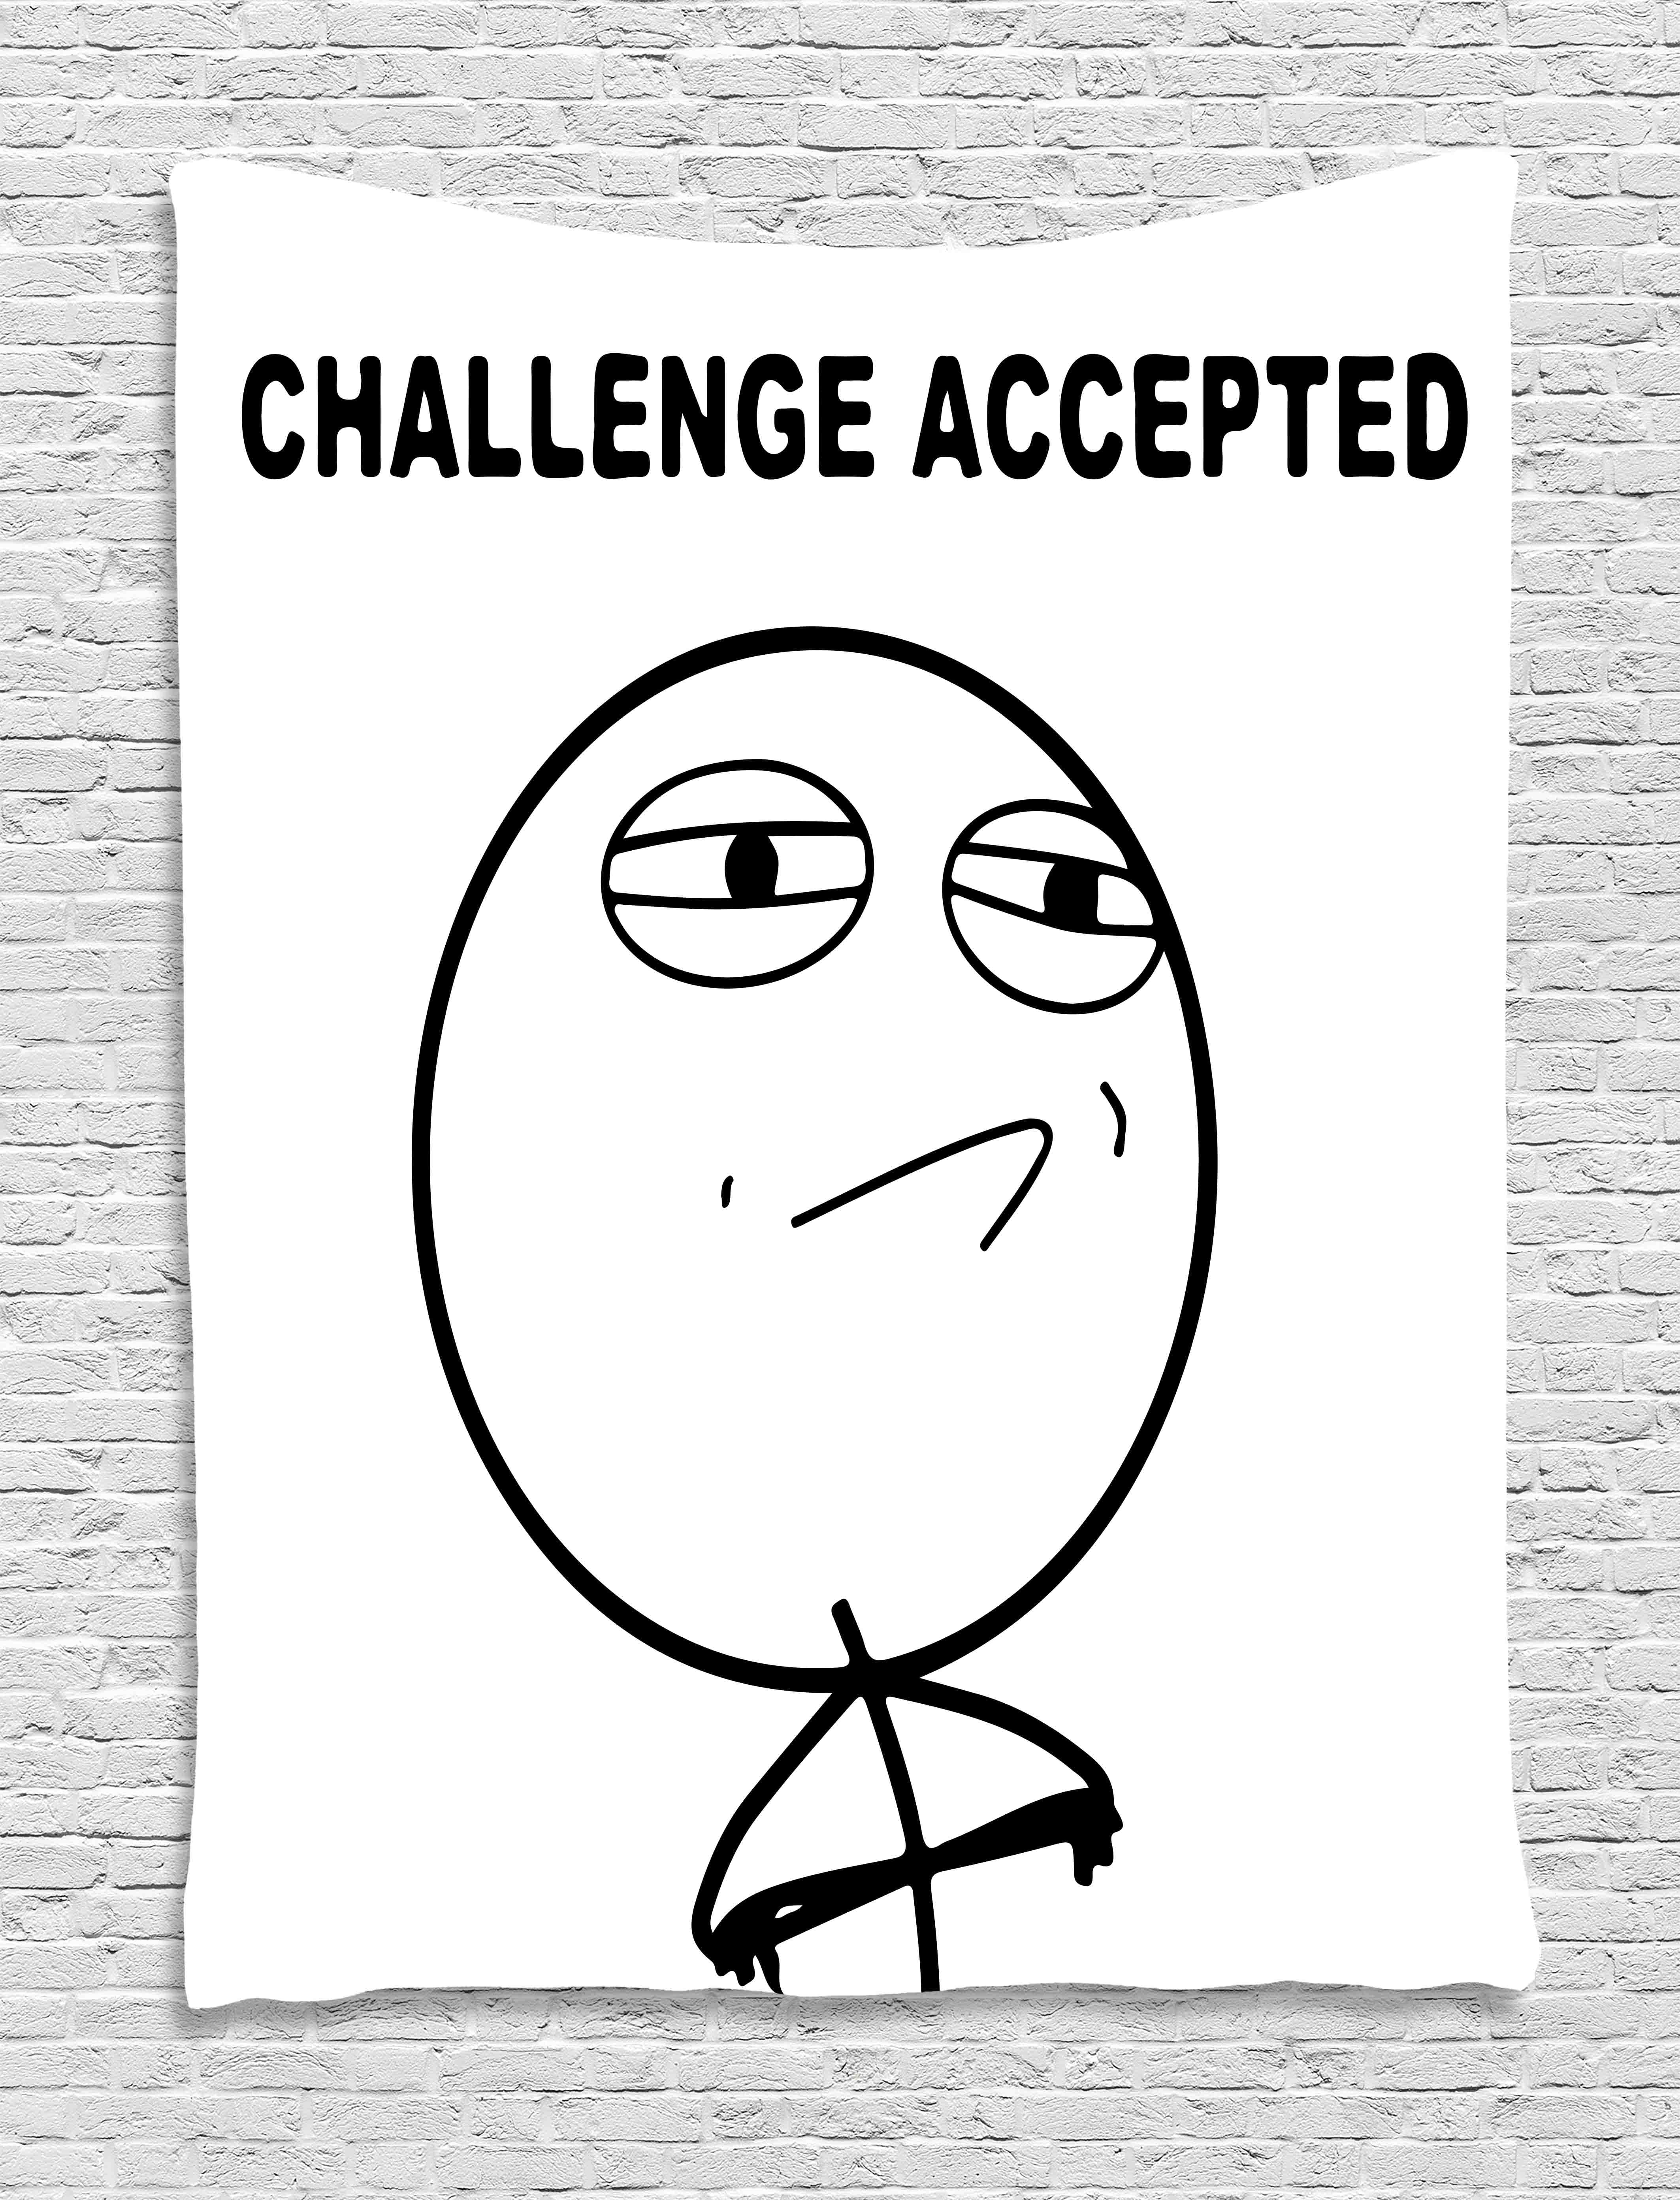 Challenge accepted. Challenge accepted Мем. ЧЕЛЛЕНДЖ аксептед Мем. Challenge accept. Challenge accepted Барни.